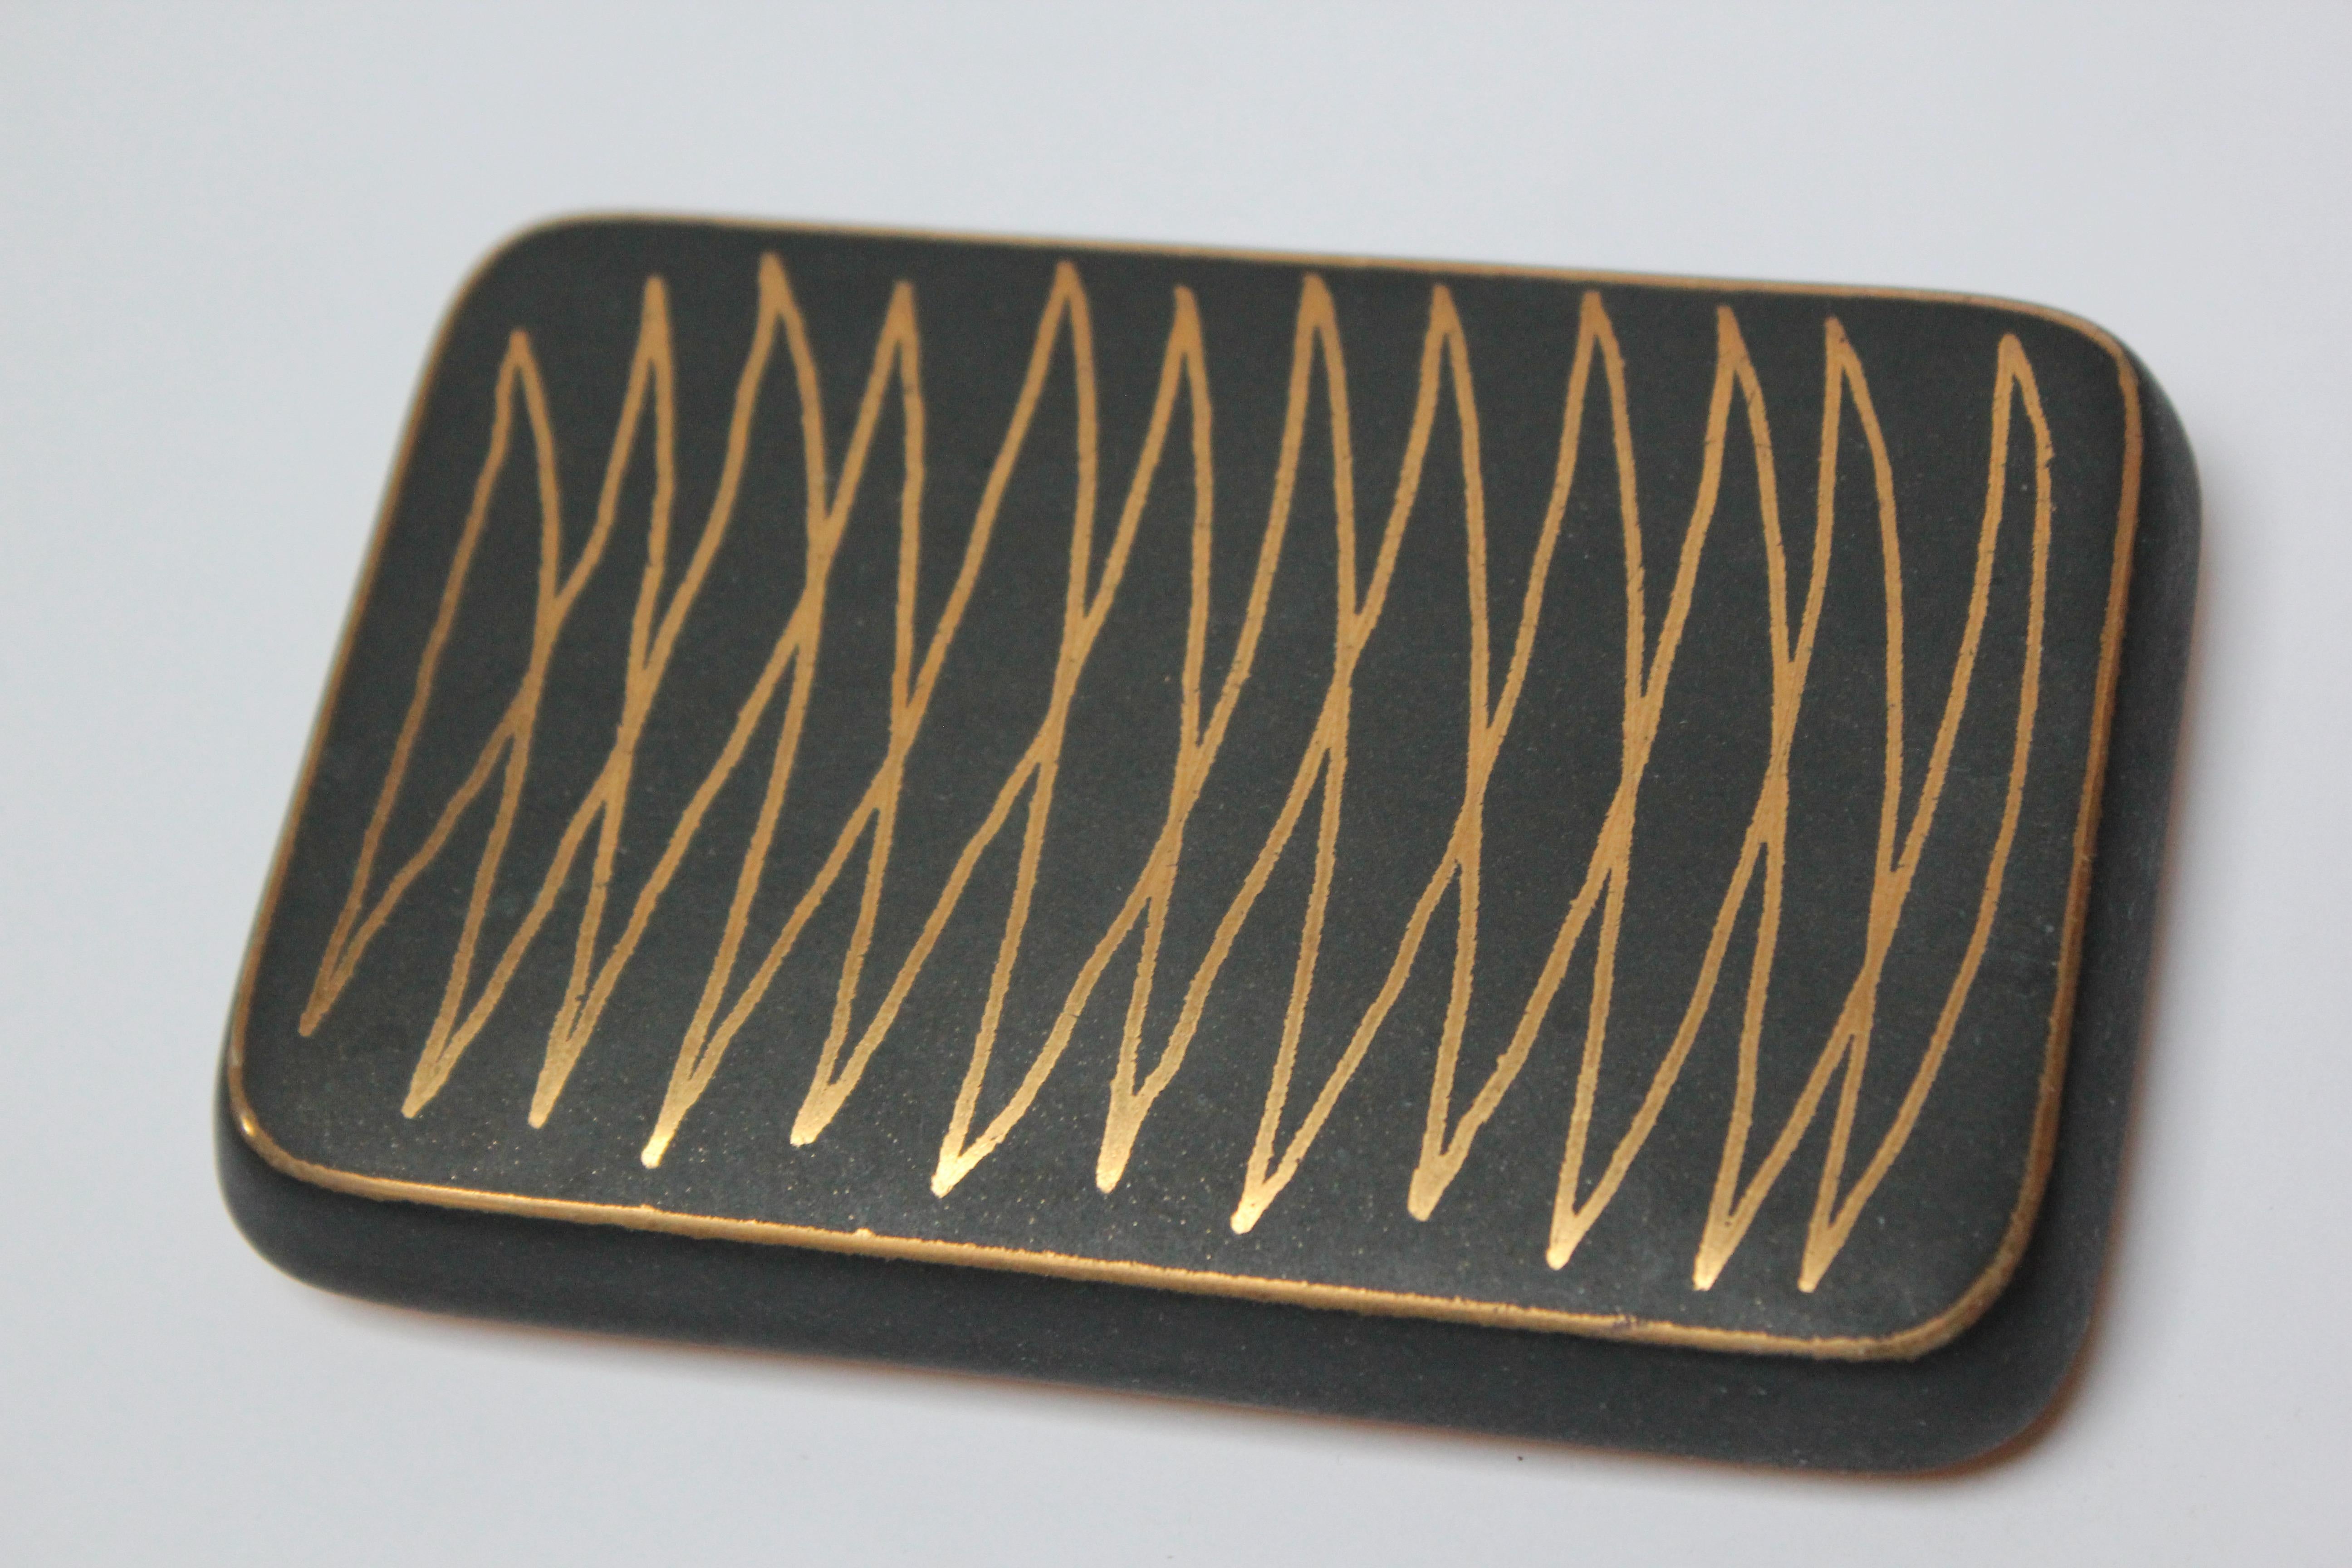 Small Art Deco Black and Gold Ceramic Decorative Lidded Box by Waylande Gregory 3